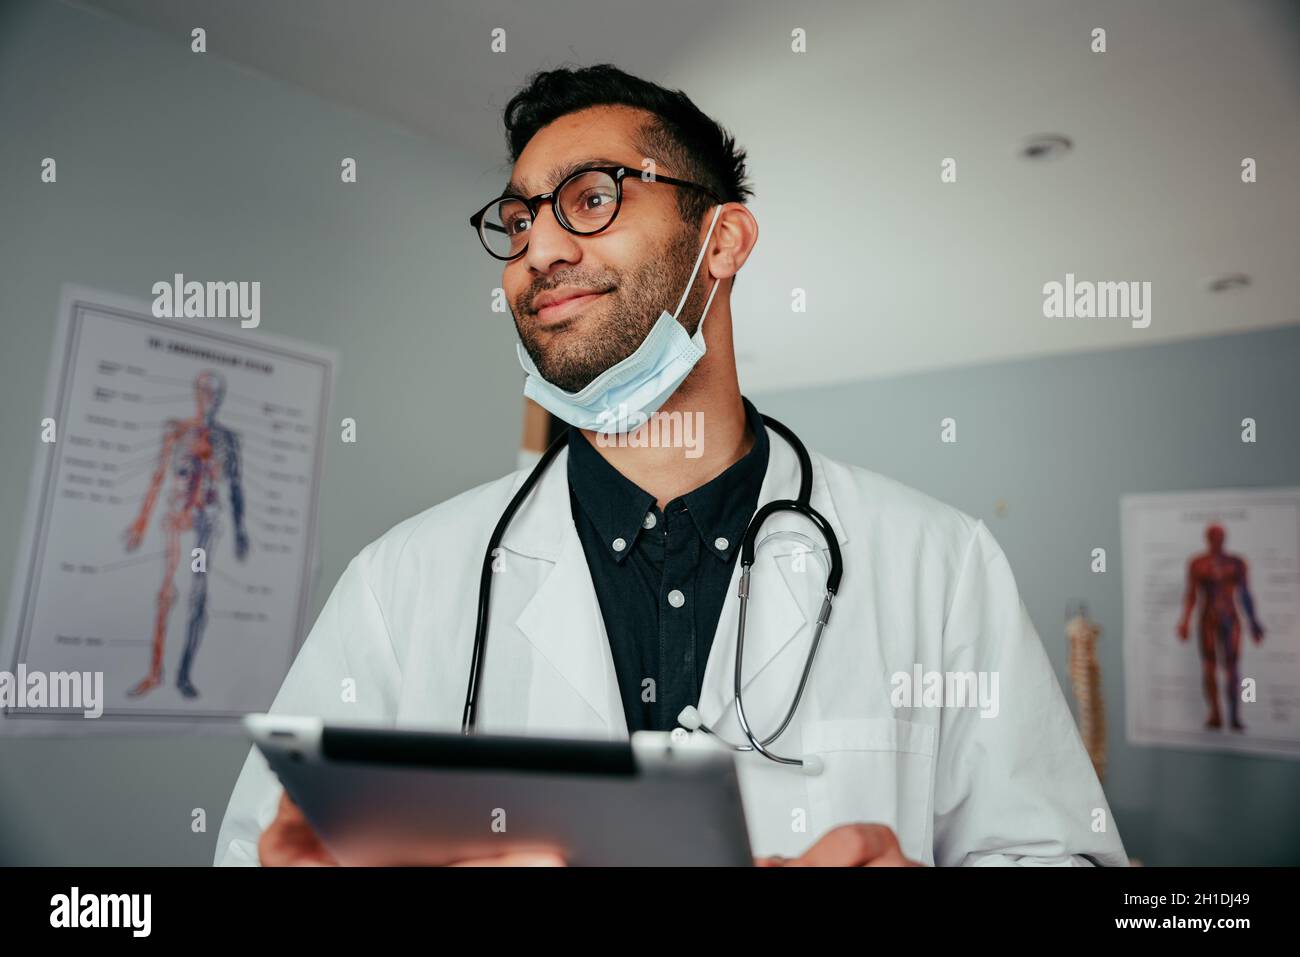 Mixed race male surgeon standing in office holding digital tablet Stock Photo